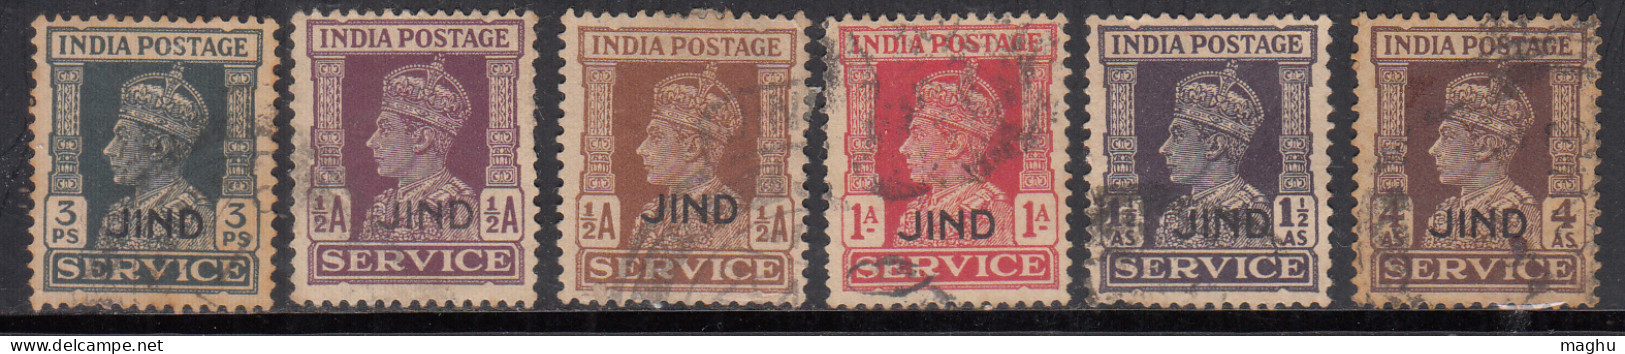 6 Diff., Used Jind SERVICE KGVI Series, 1939-1943, British India - Jhind